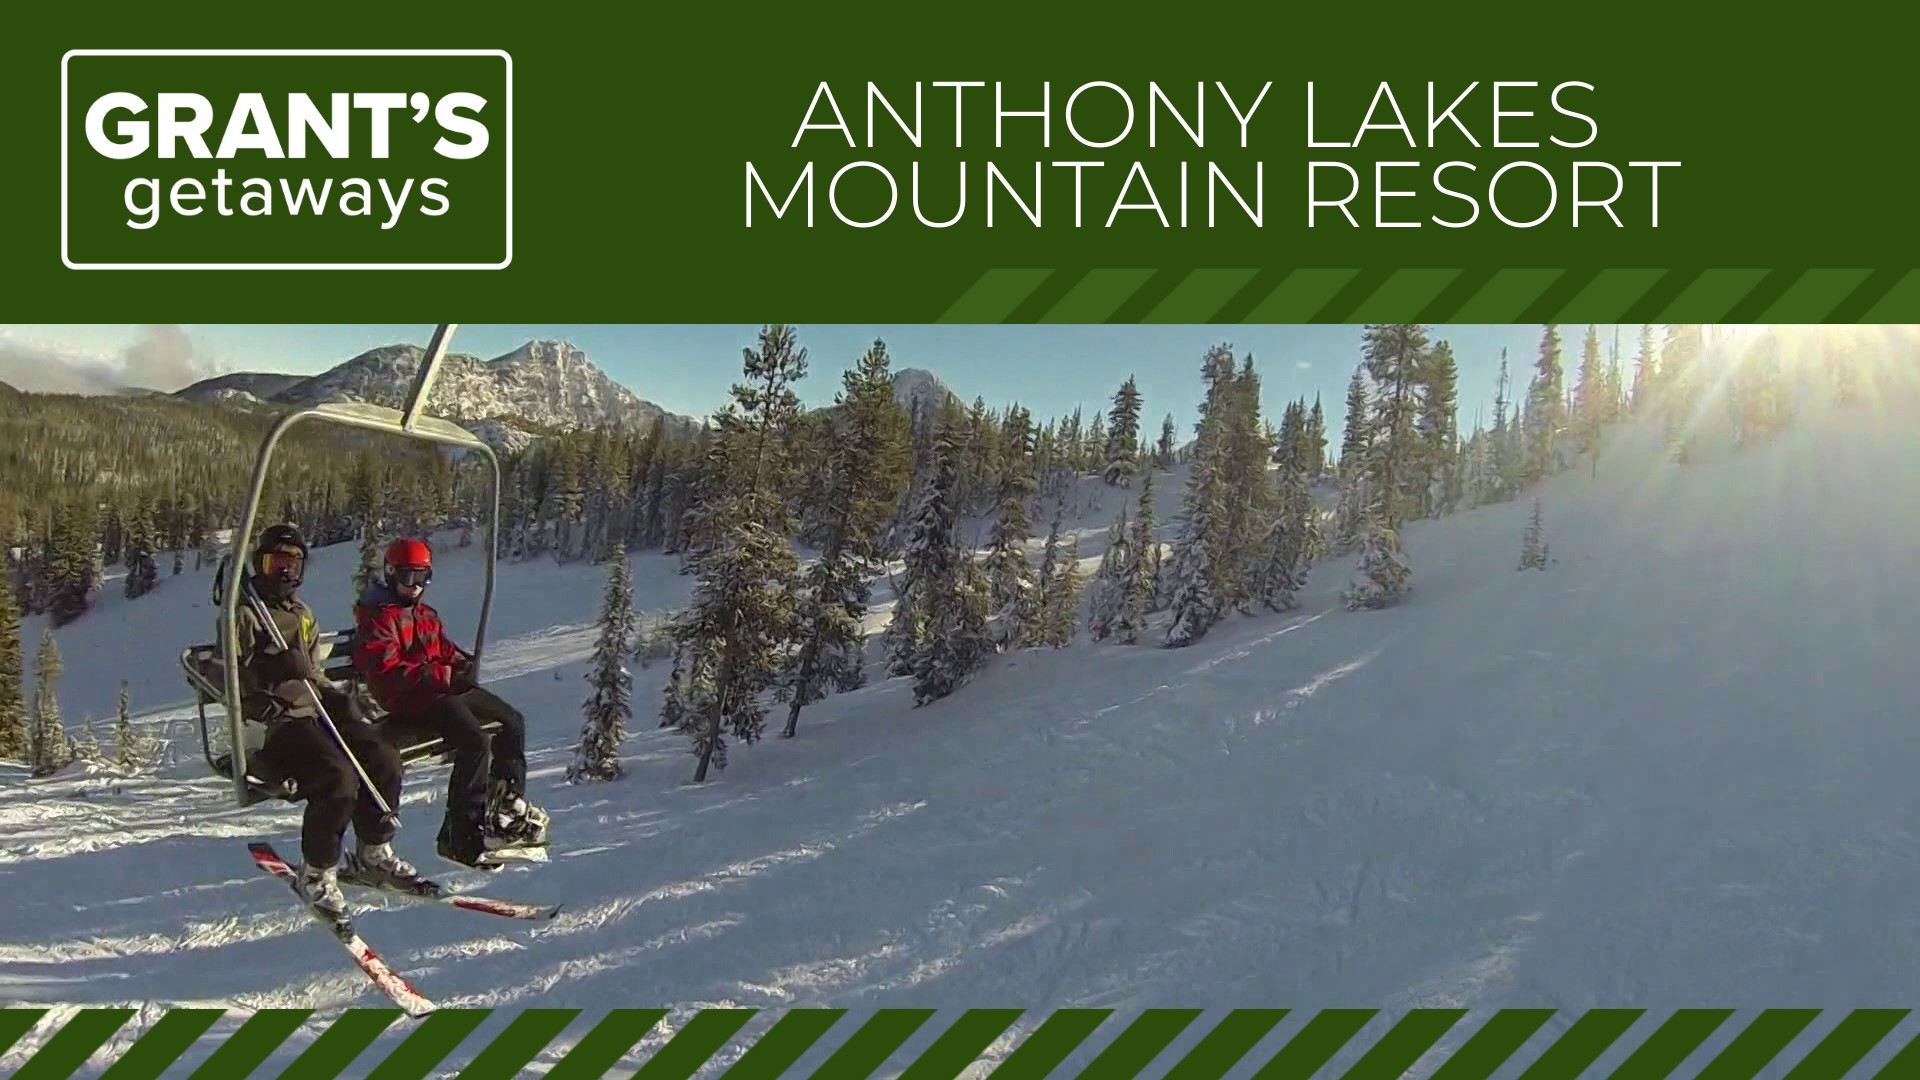 Tucked away in the Elkhorn Range of the Blue Mountains, Anthony Lakes Mountain Resort offers gorgeous views with a "down home" feeling.